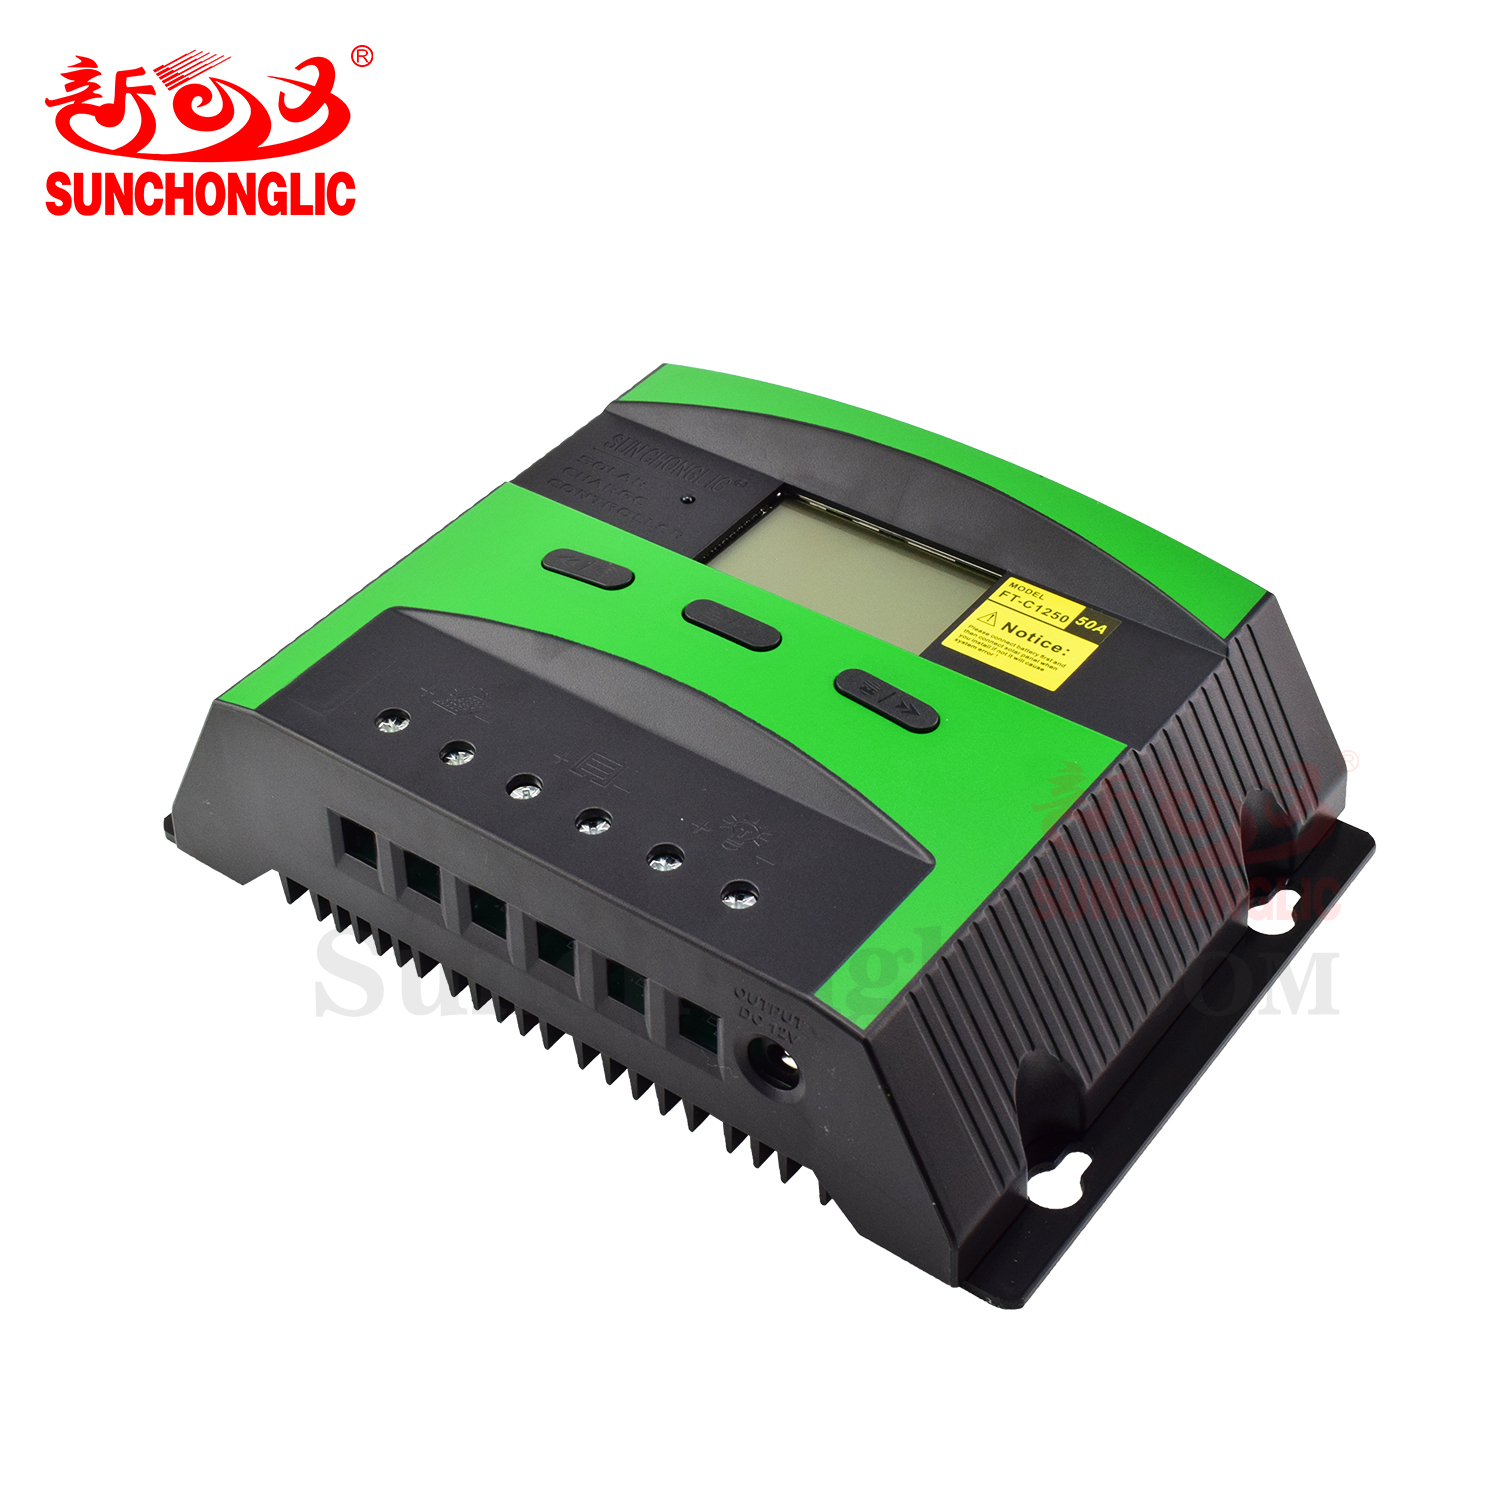 Solar Charge Controller -  FT-C1250